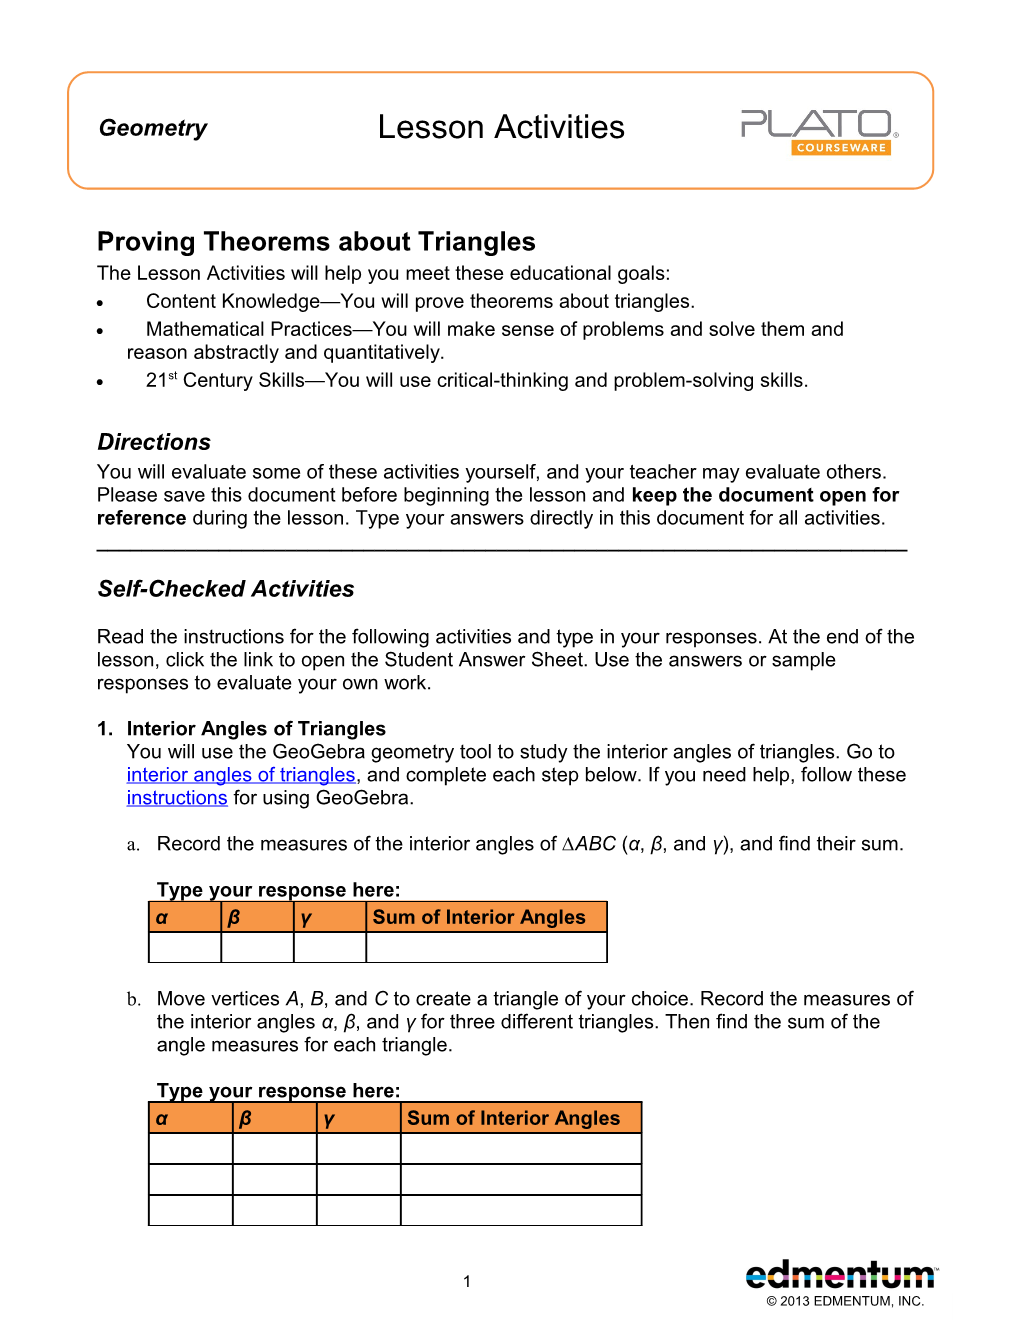 Proving Theorems About Triangles